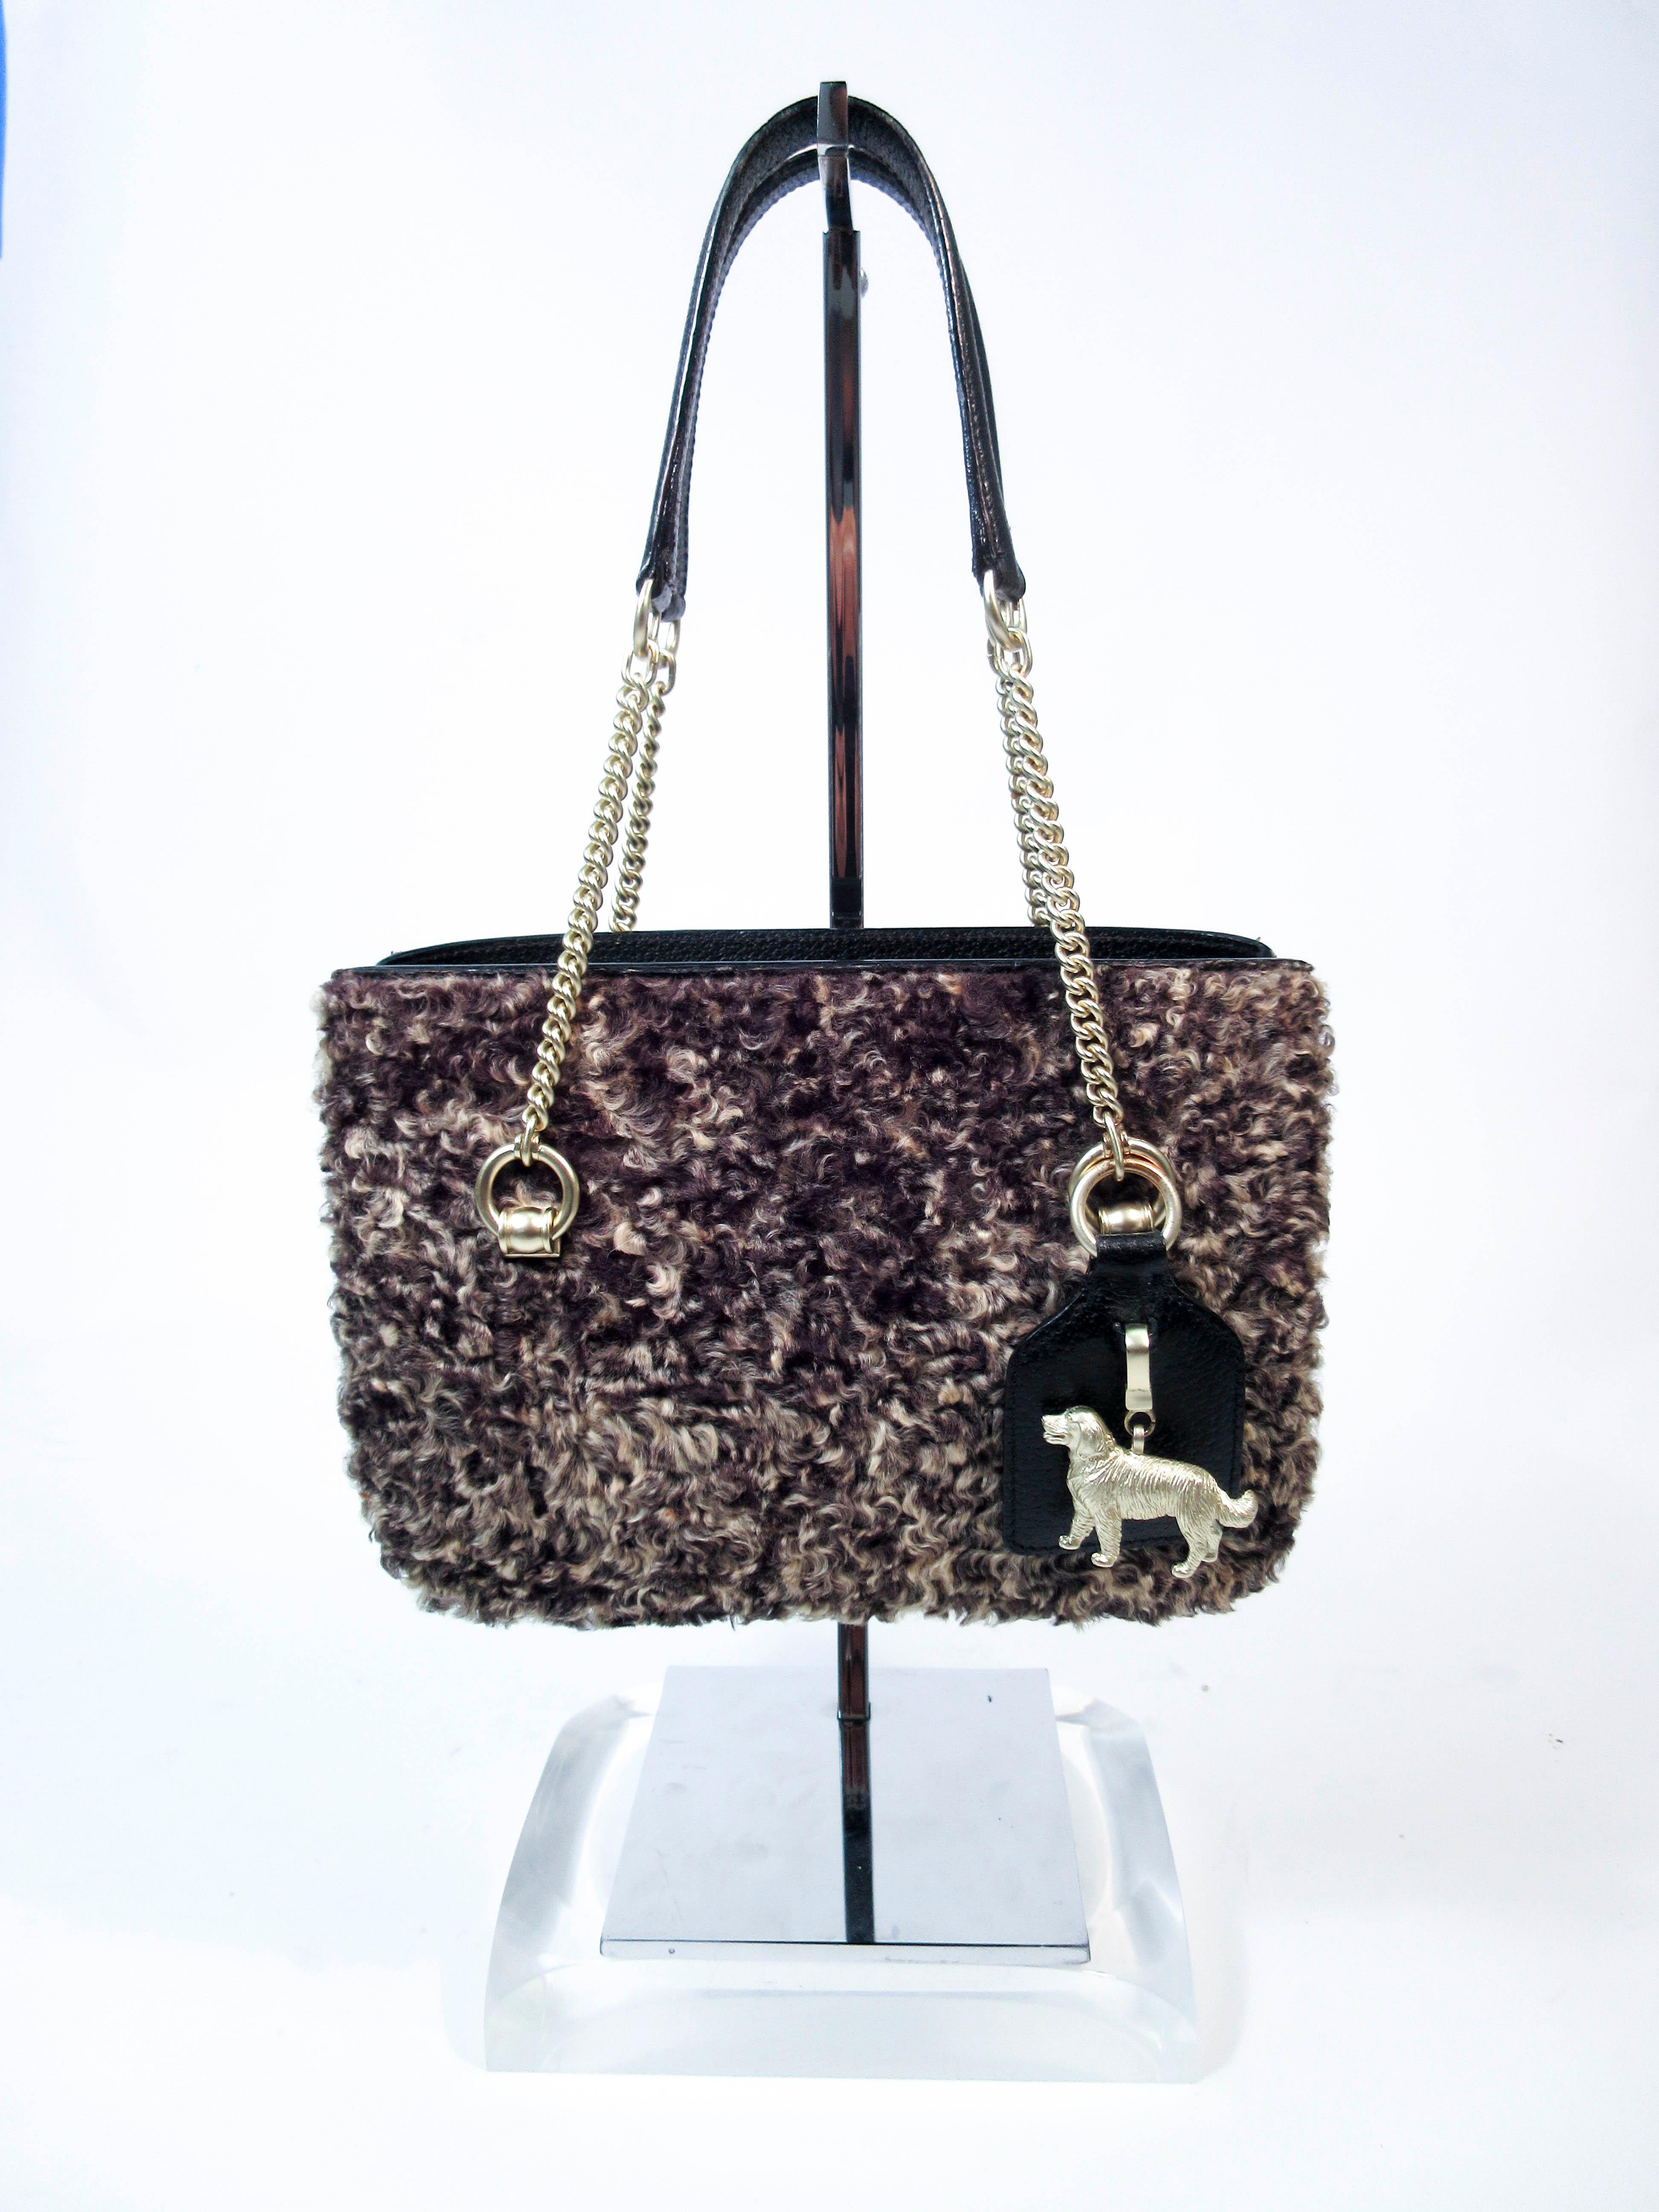 This Barry Keiselstein Cord purse is composed of a beautiful curly lamb with gold hardware 'Dog' accents. Features an interior zipper compartment with two side compartments, comes with dustbag. In excellent almost new pre-owned condition (some signs